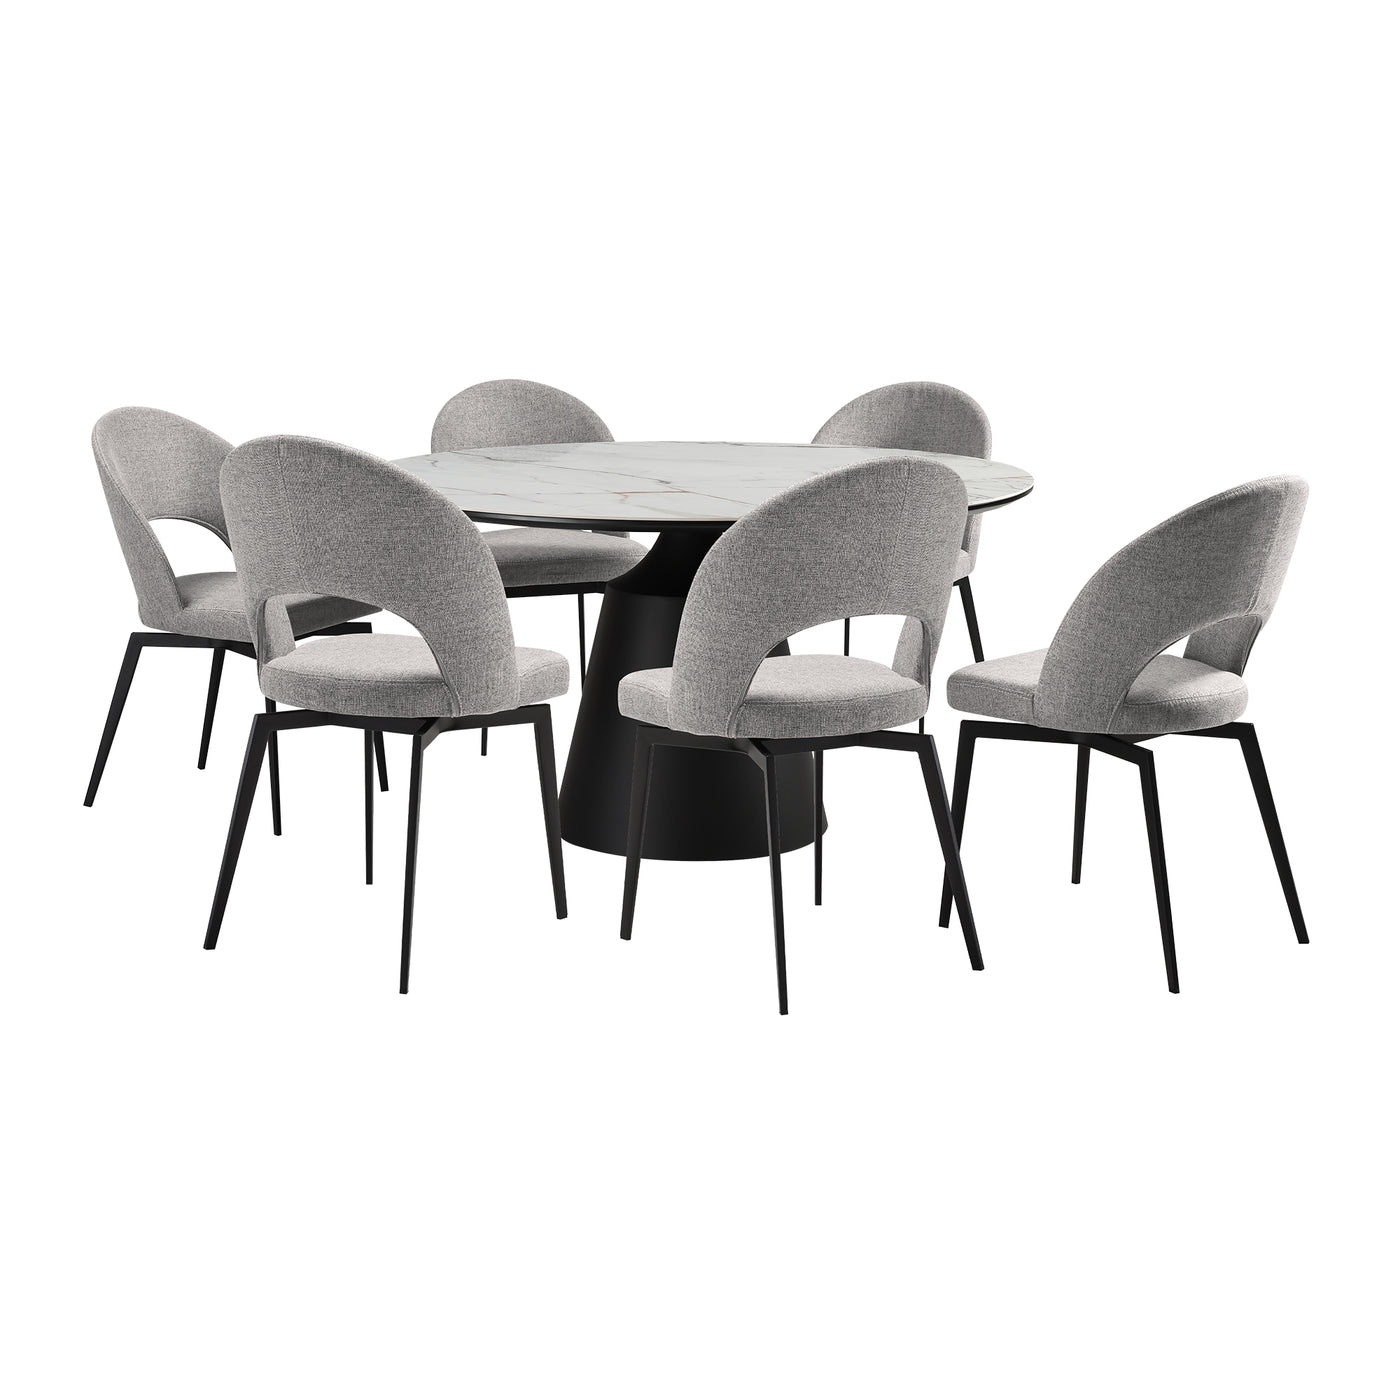 Knox and Lucia 7 Piece Dining Set